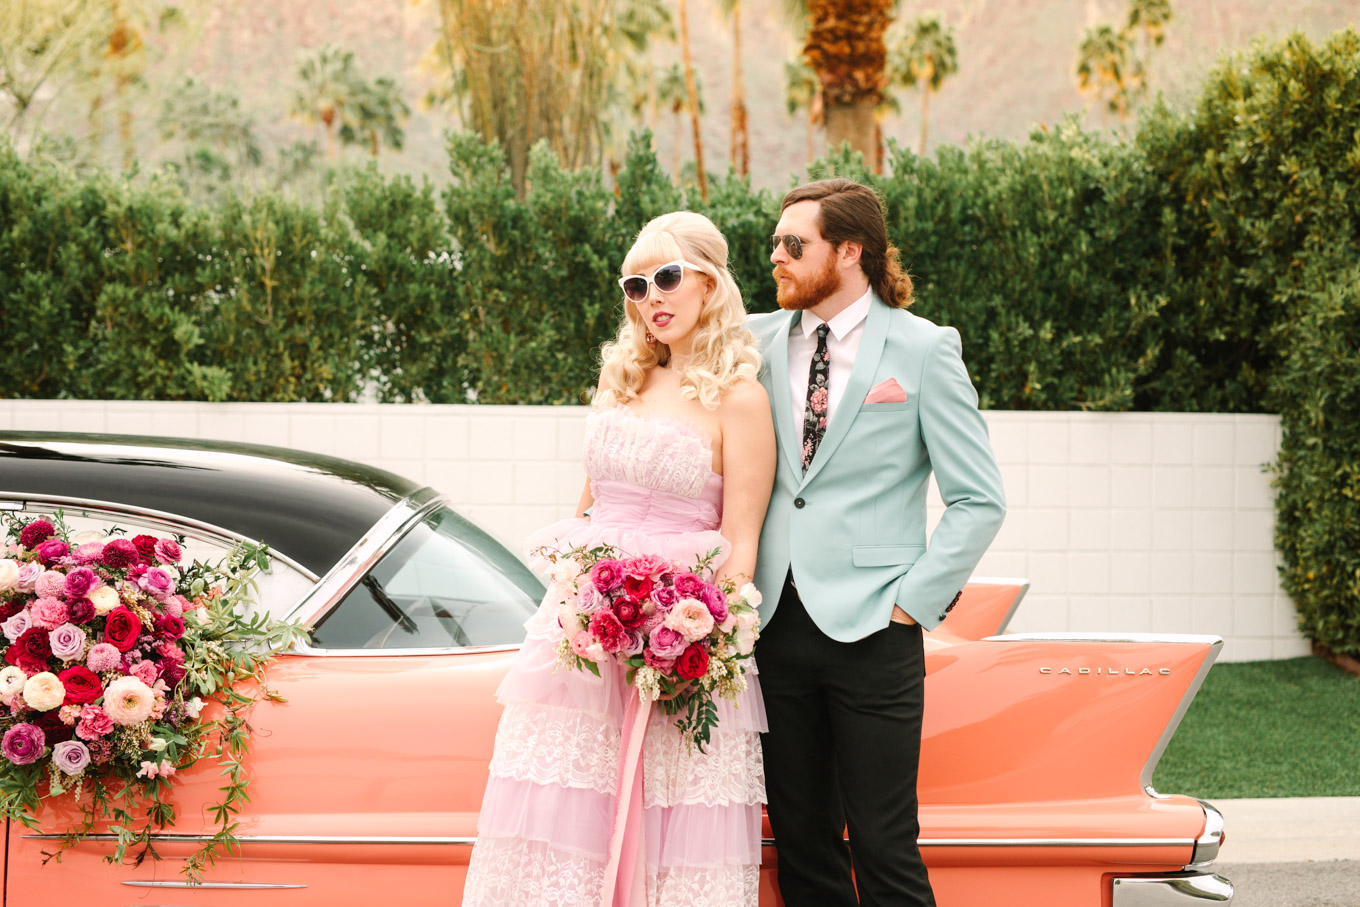 Colorful couple in retro clothing. Modern vintage-inspired Palm Springs engagement session with a 1960s pink Cadillac, retro clothing, and flowers by Shindig Chic. | Colorful and elevated wedding inspiration for fun-loving couples in Southern California | #engagementsession #PalmSpringsengagement #vintageweddingdress #floralcar #pinkcar   Source: Mary Costa Photography | Los Angeles